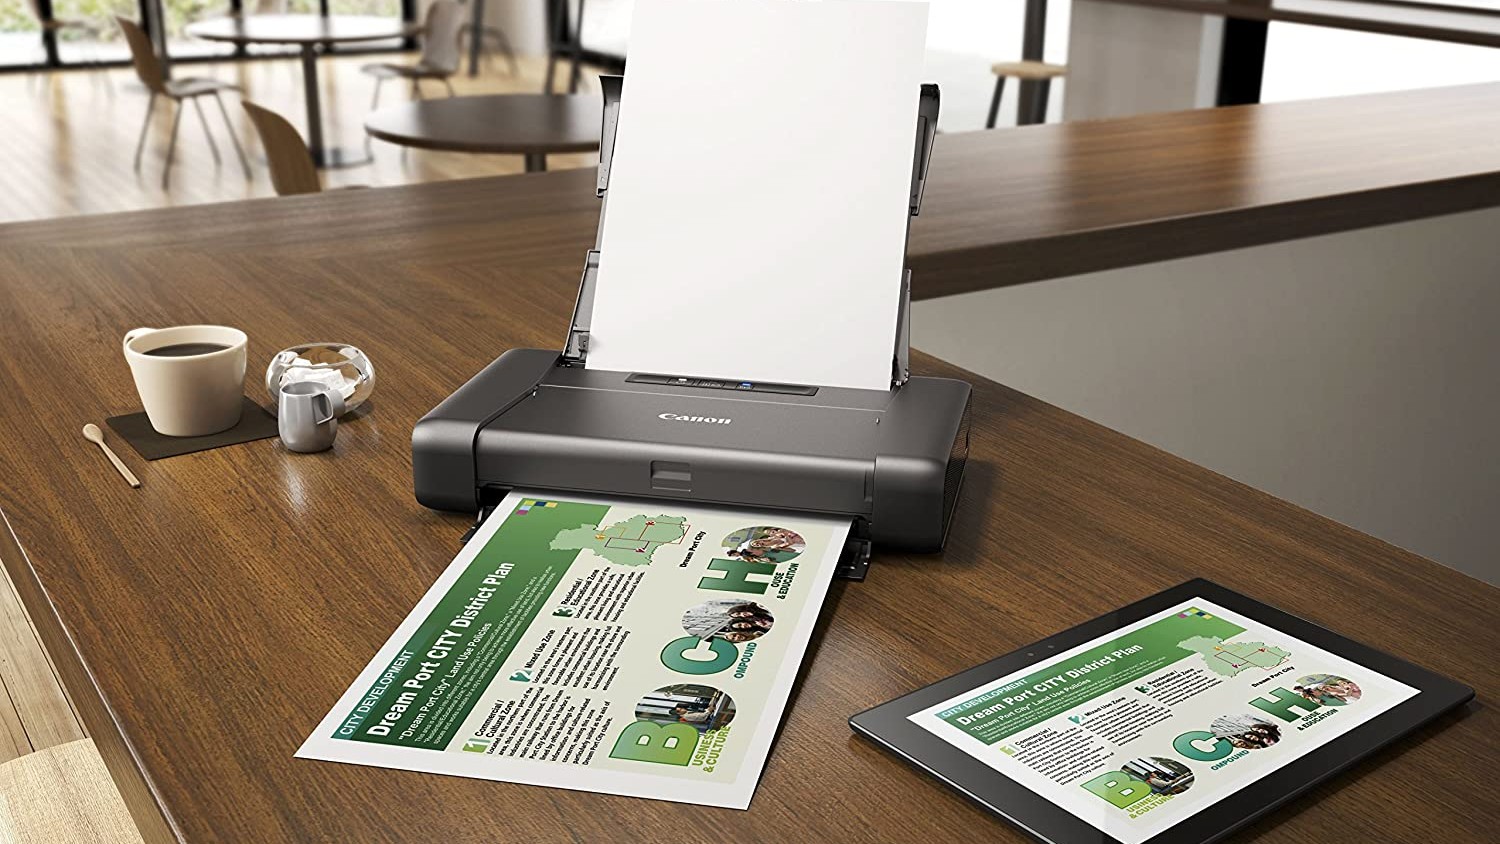 Discover the Best Photo Mini Printer for Your Creative Needs